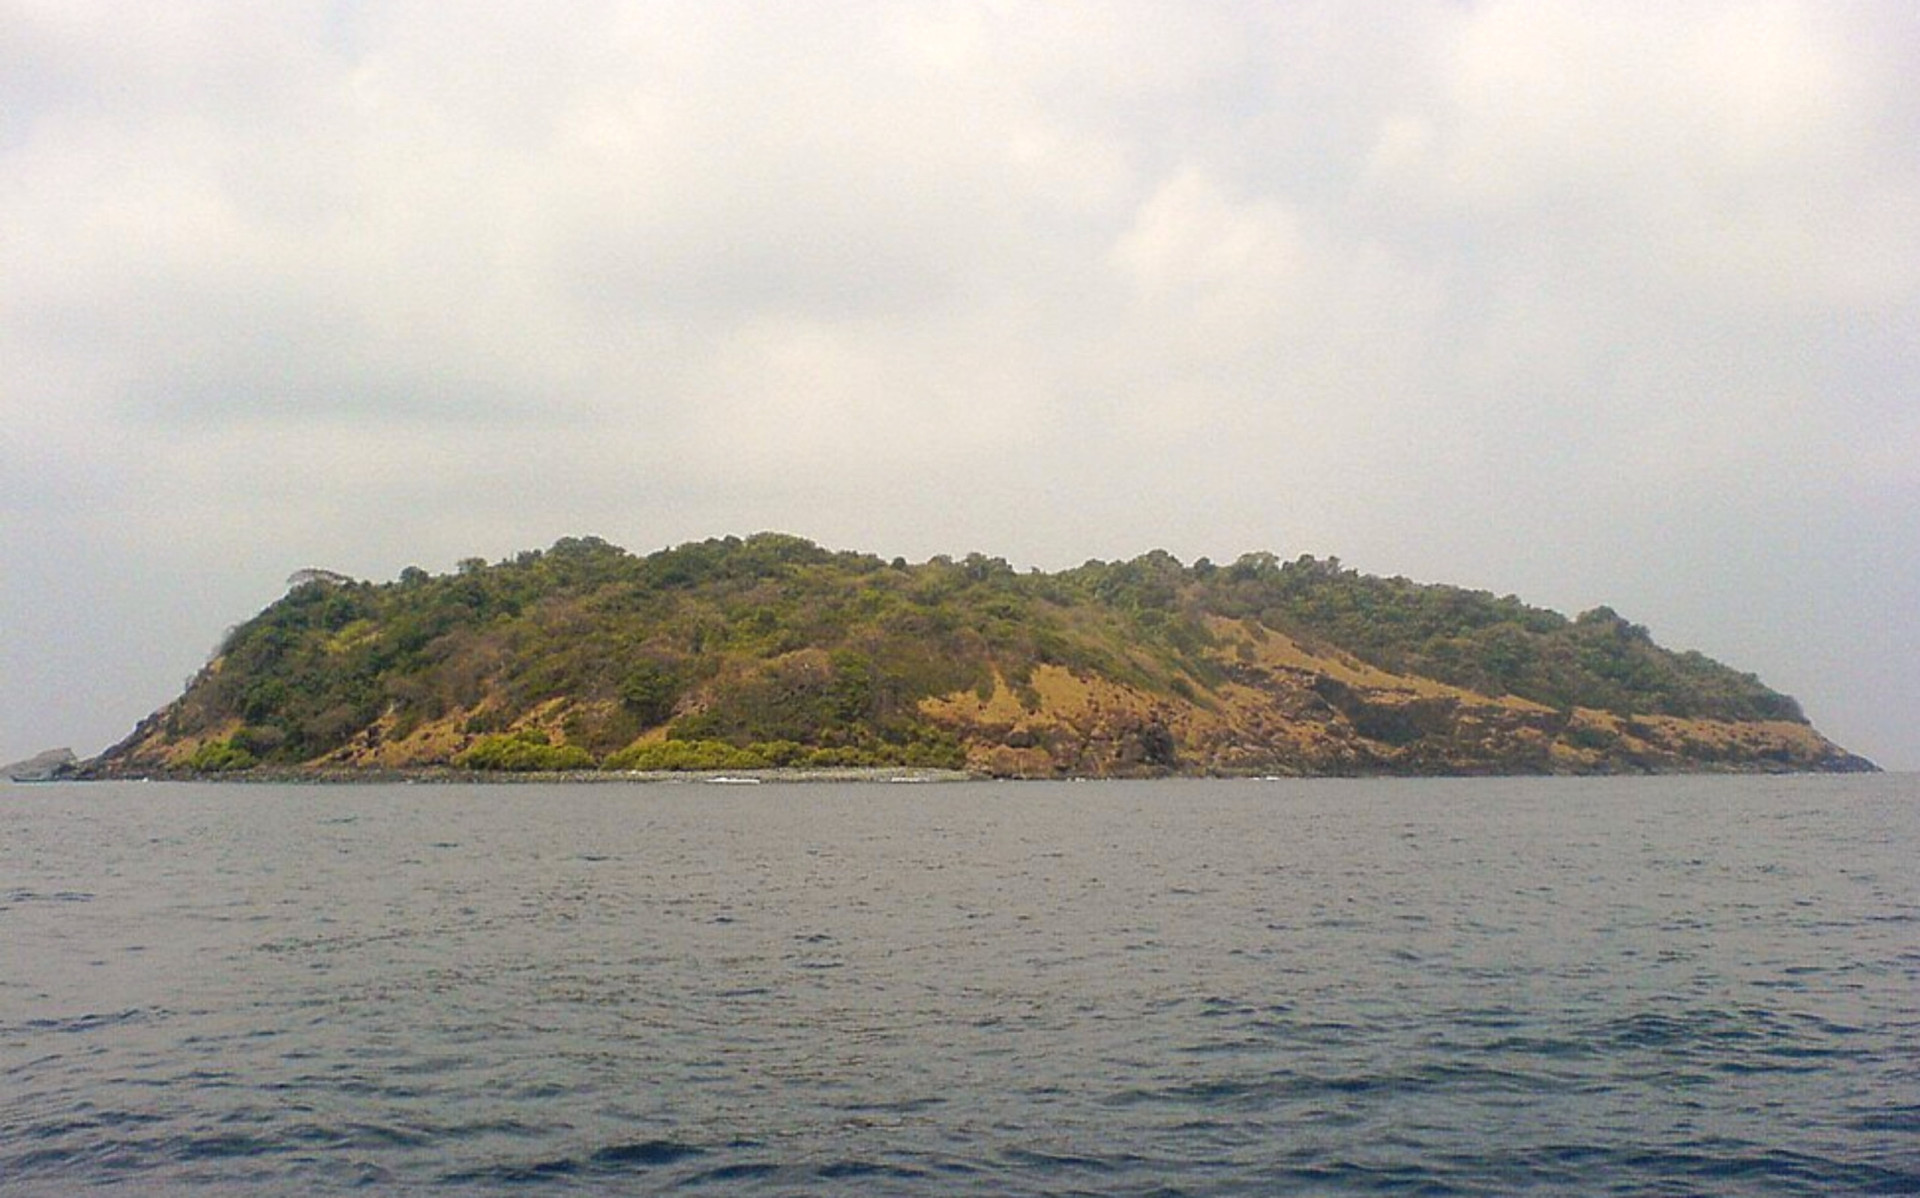 <p>Netrani Island is moored off the coast of Karnataka in the Arabian Sea. A coral island whose reefs teem with an impressive variety of sea life, Netrani is also a cultural draw, being the location of the famous Hindu temple Jai Bajrangbali.</p><p>You may also like:<a href="https://www.starsinsider.com/n/494740?utm_source=msn.com&utm_medium=display&utm_campaign=referral_description&utm_content=689154en-my"> What you might not know about NATO</a></p>